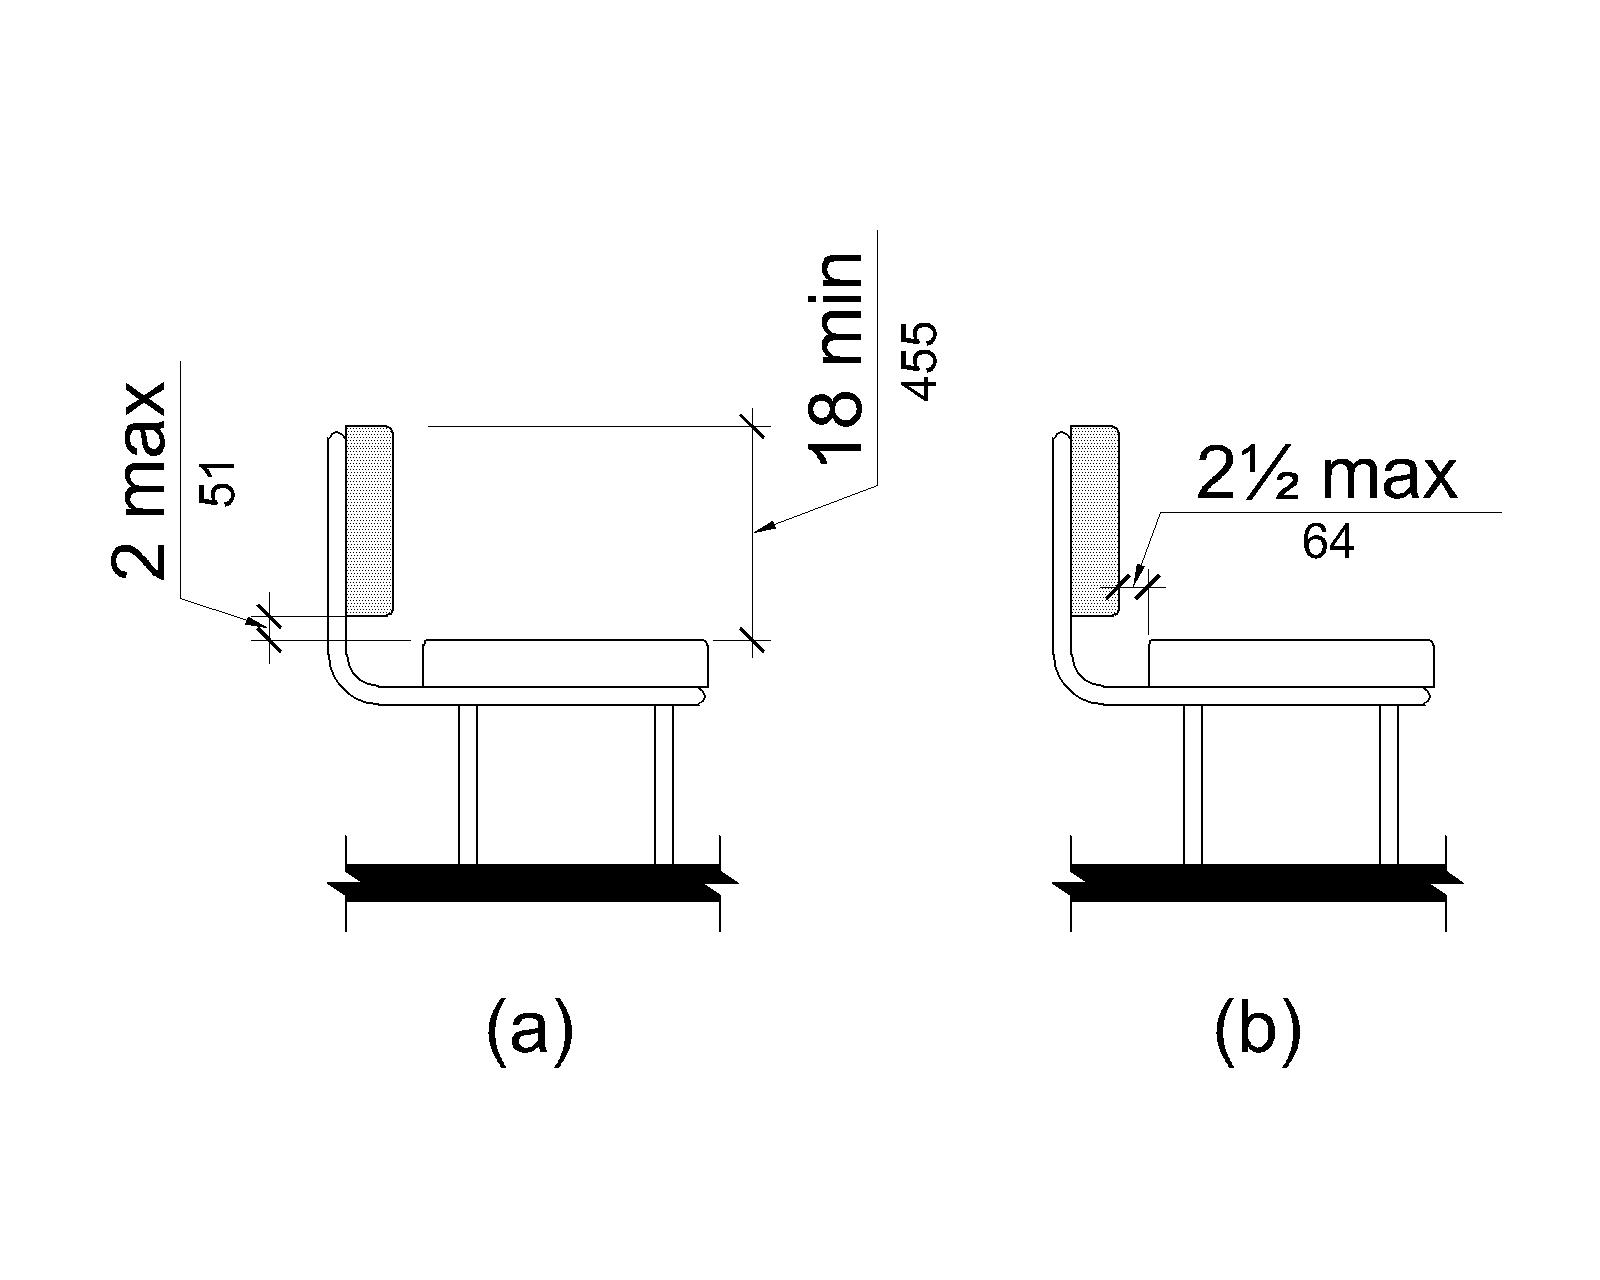 Figure (a) is an elevation drawing of a bench with a back. The bottom edge of the back is 2 inches (51 mm) maximum above the seat surface and the top edge of the back is 18 inches (455 mm) above the seat surface. Figure (b) shows the distance between the rear edge of the seat and the front face of the back support as 2 inches (64 mm) maximum.